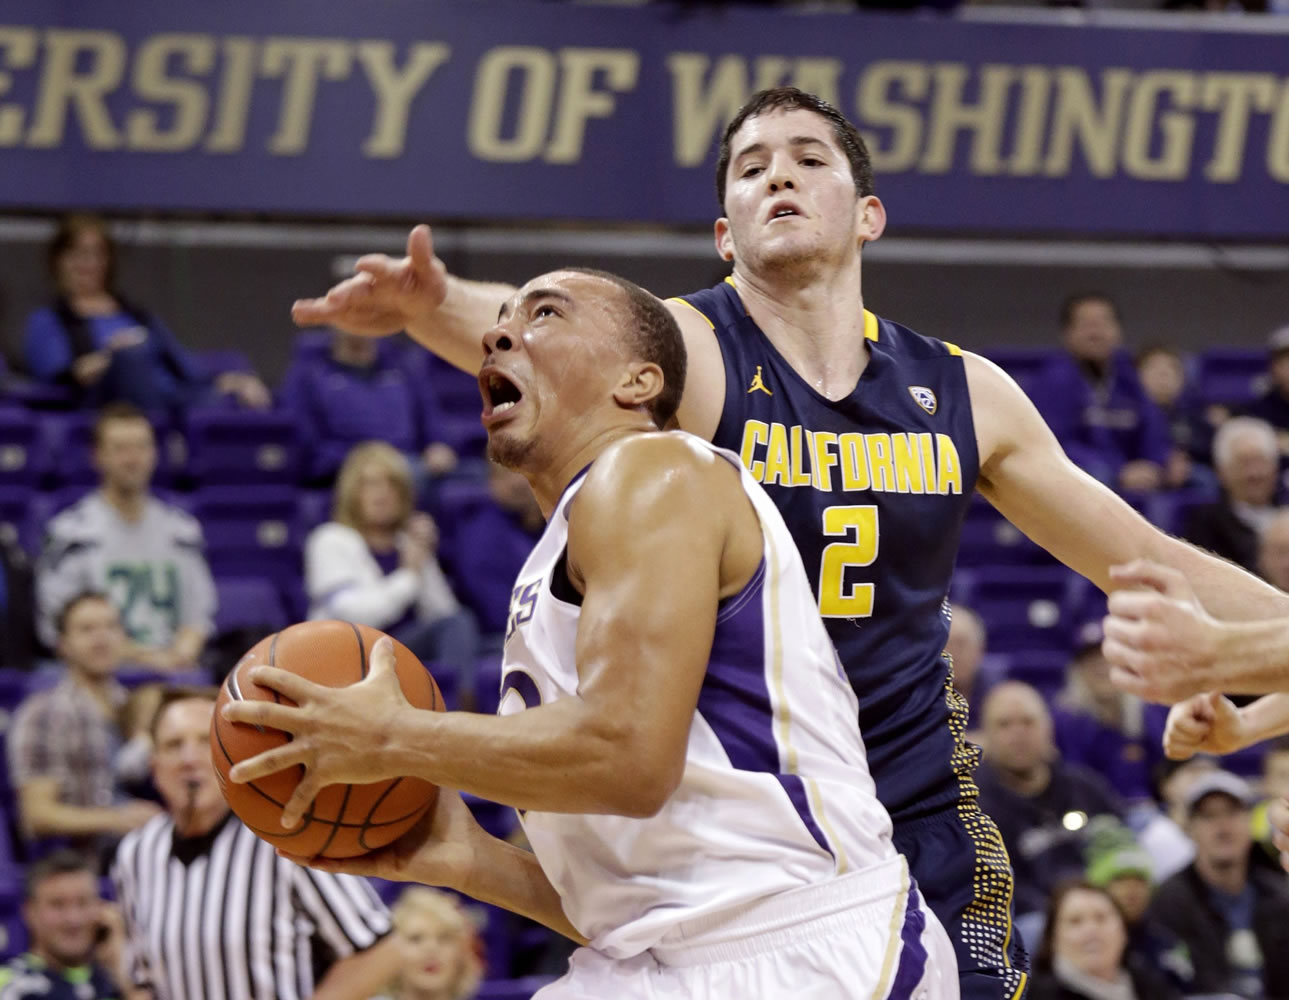 Washington's Andrew Andrews drives to the basket past California's Sam Singer in the first half on Sunday, Feb. 1, 2015, in Seattle.